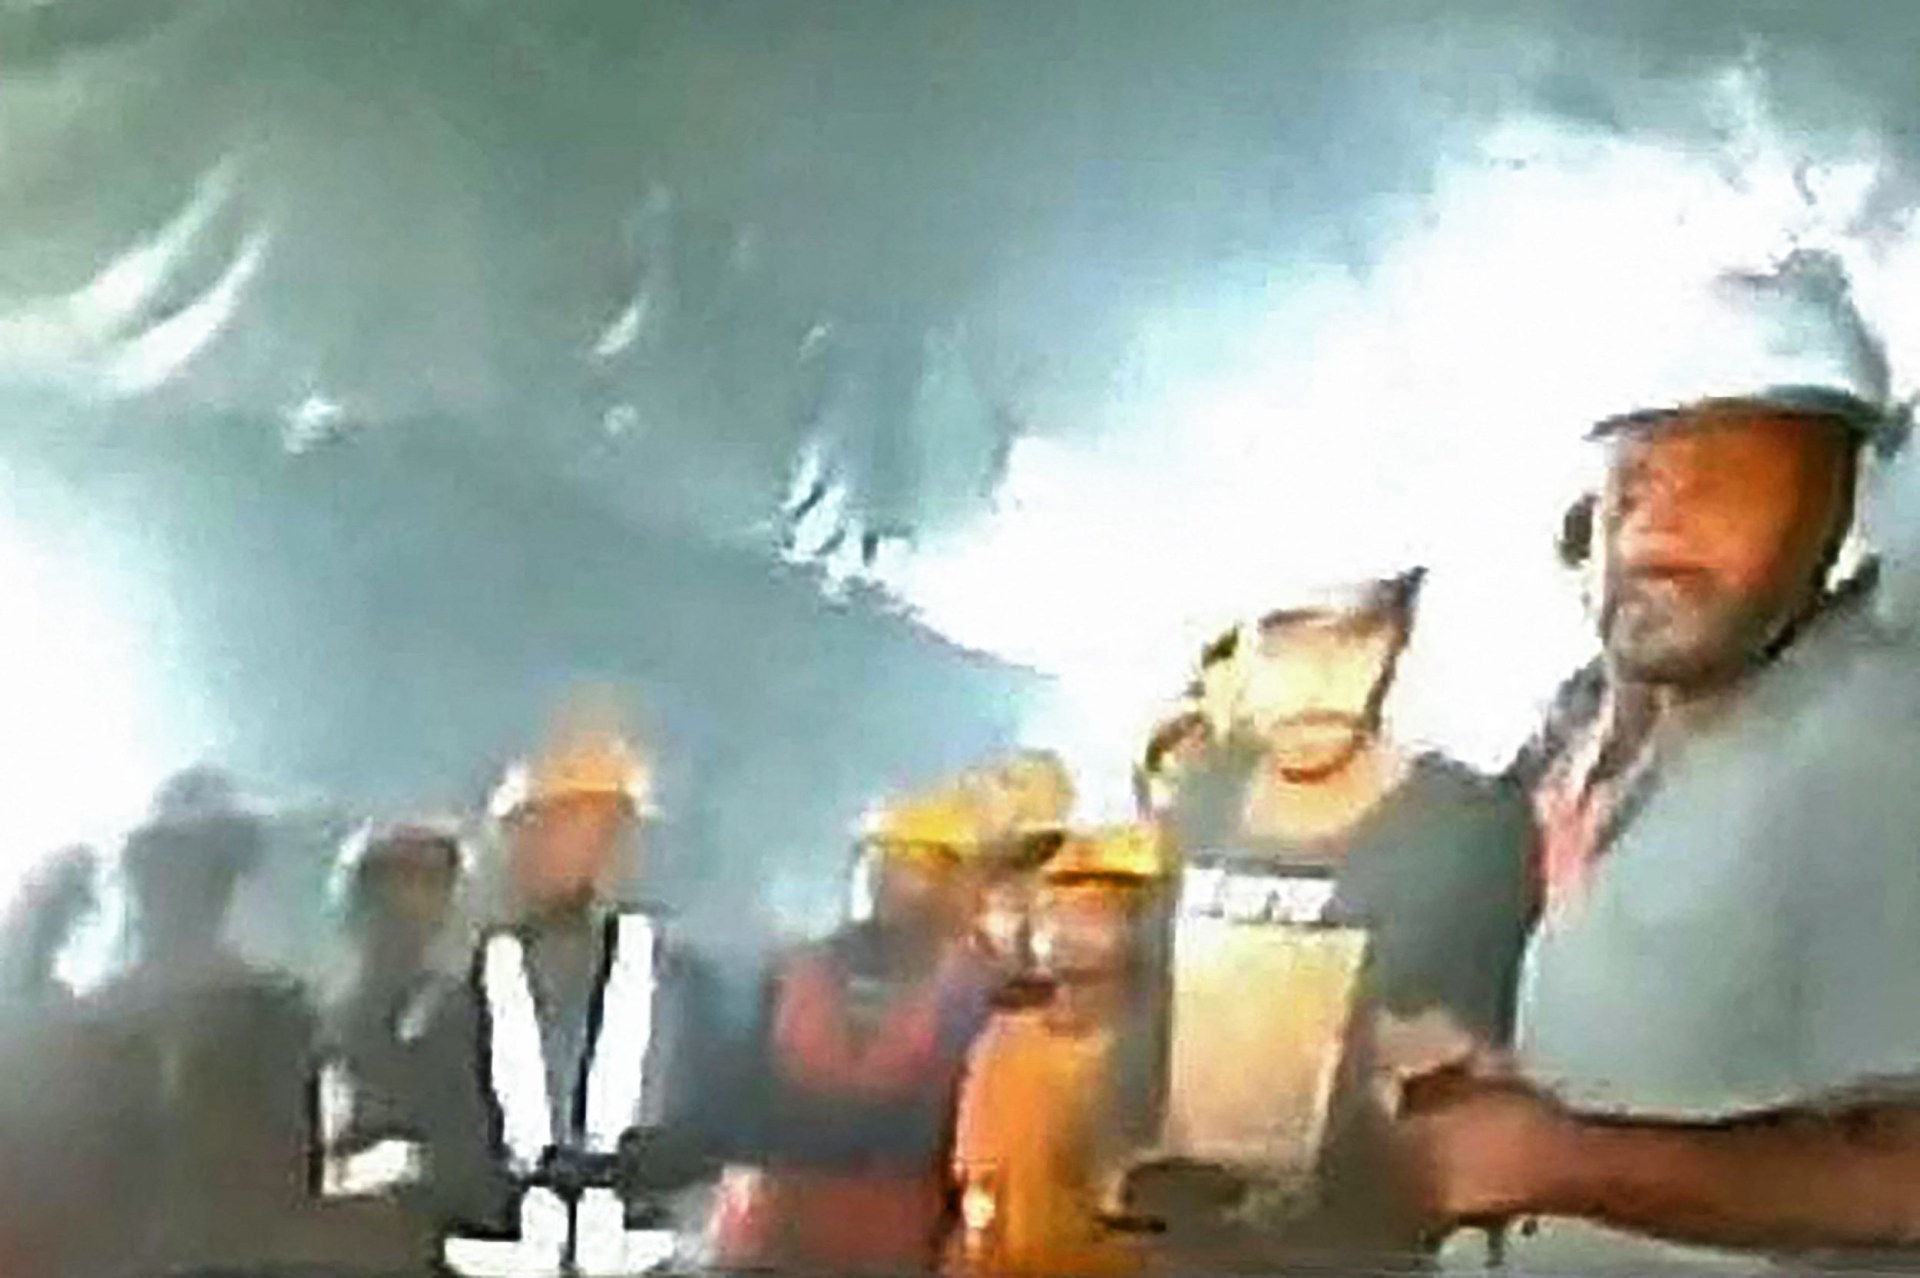 first glimpse of 41 workers trapped for 10 days in collapsed road tunnel